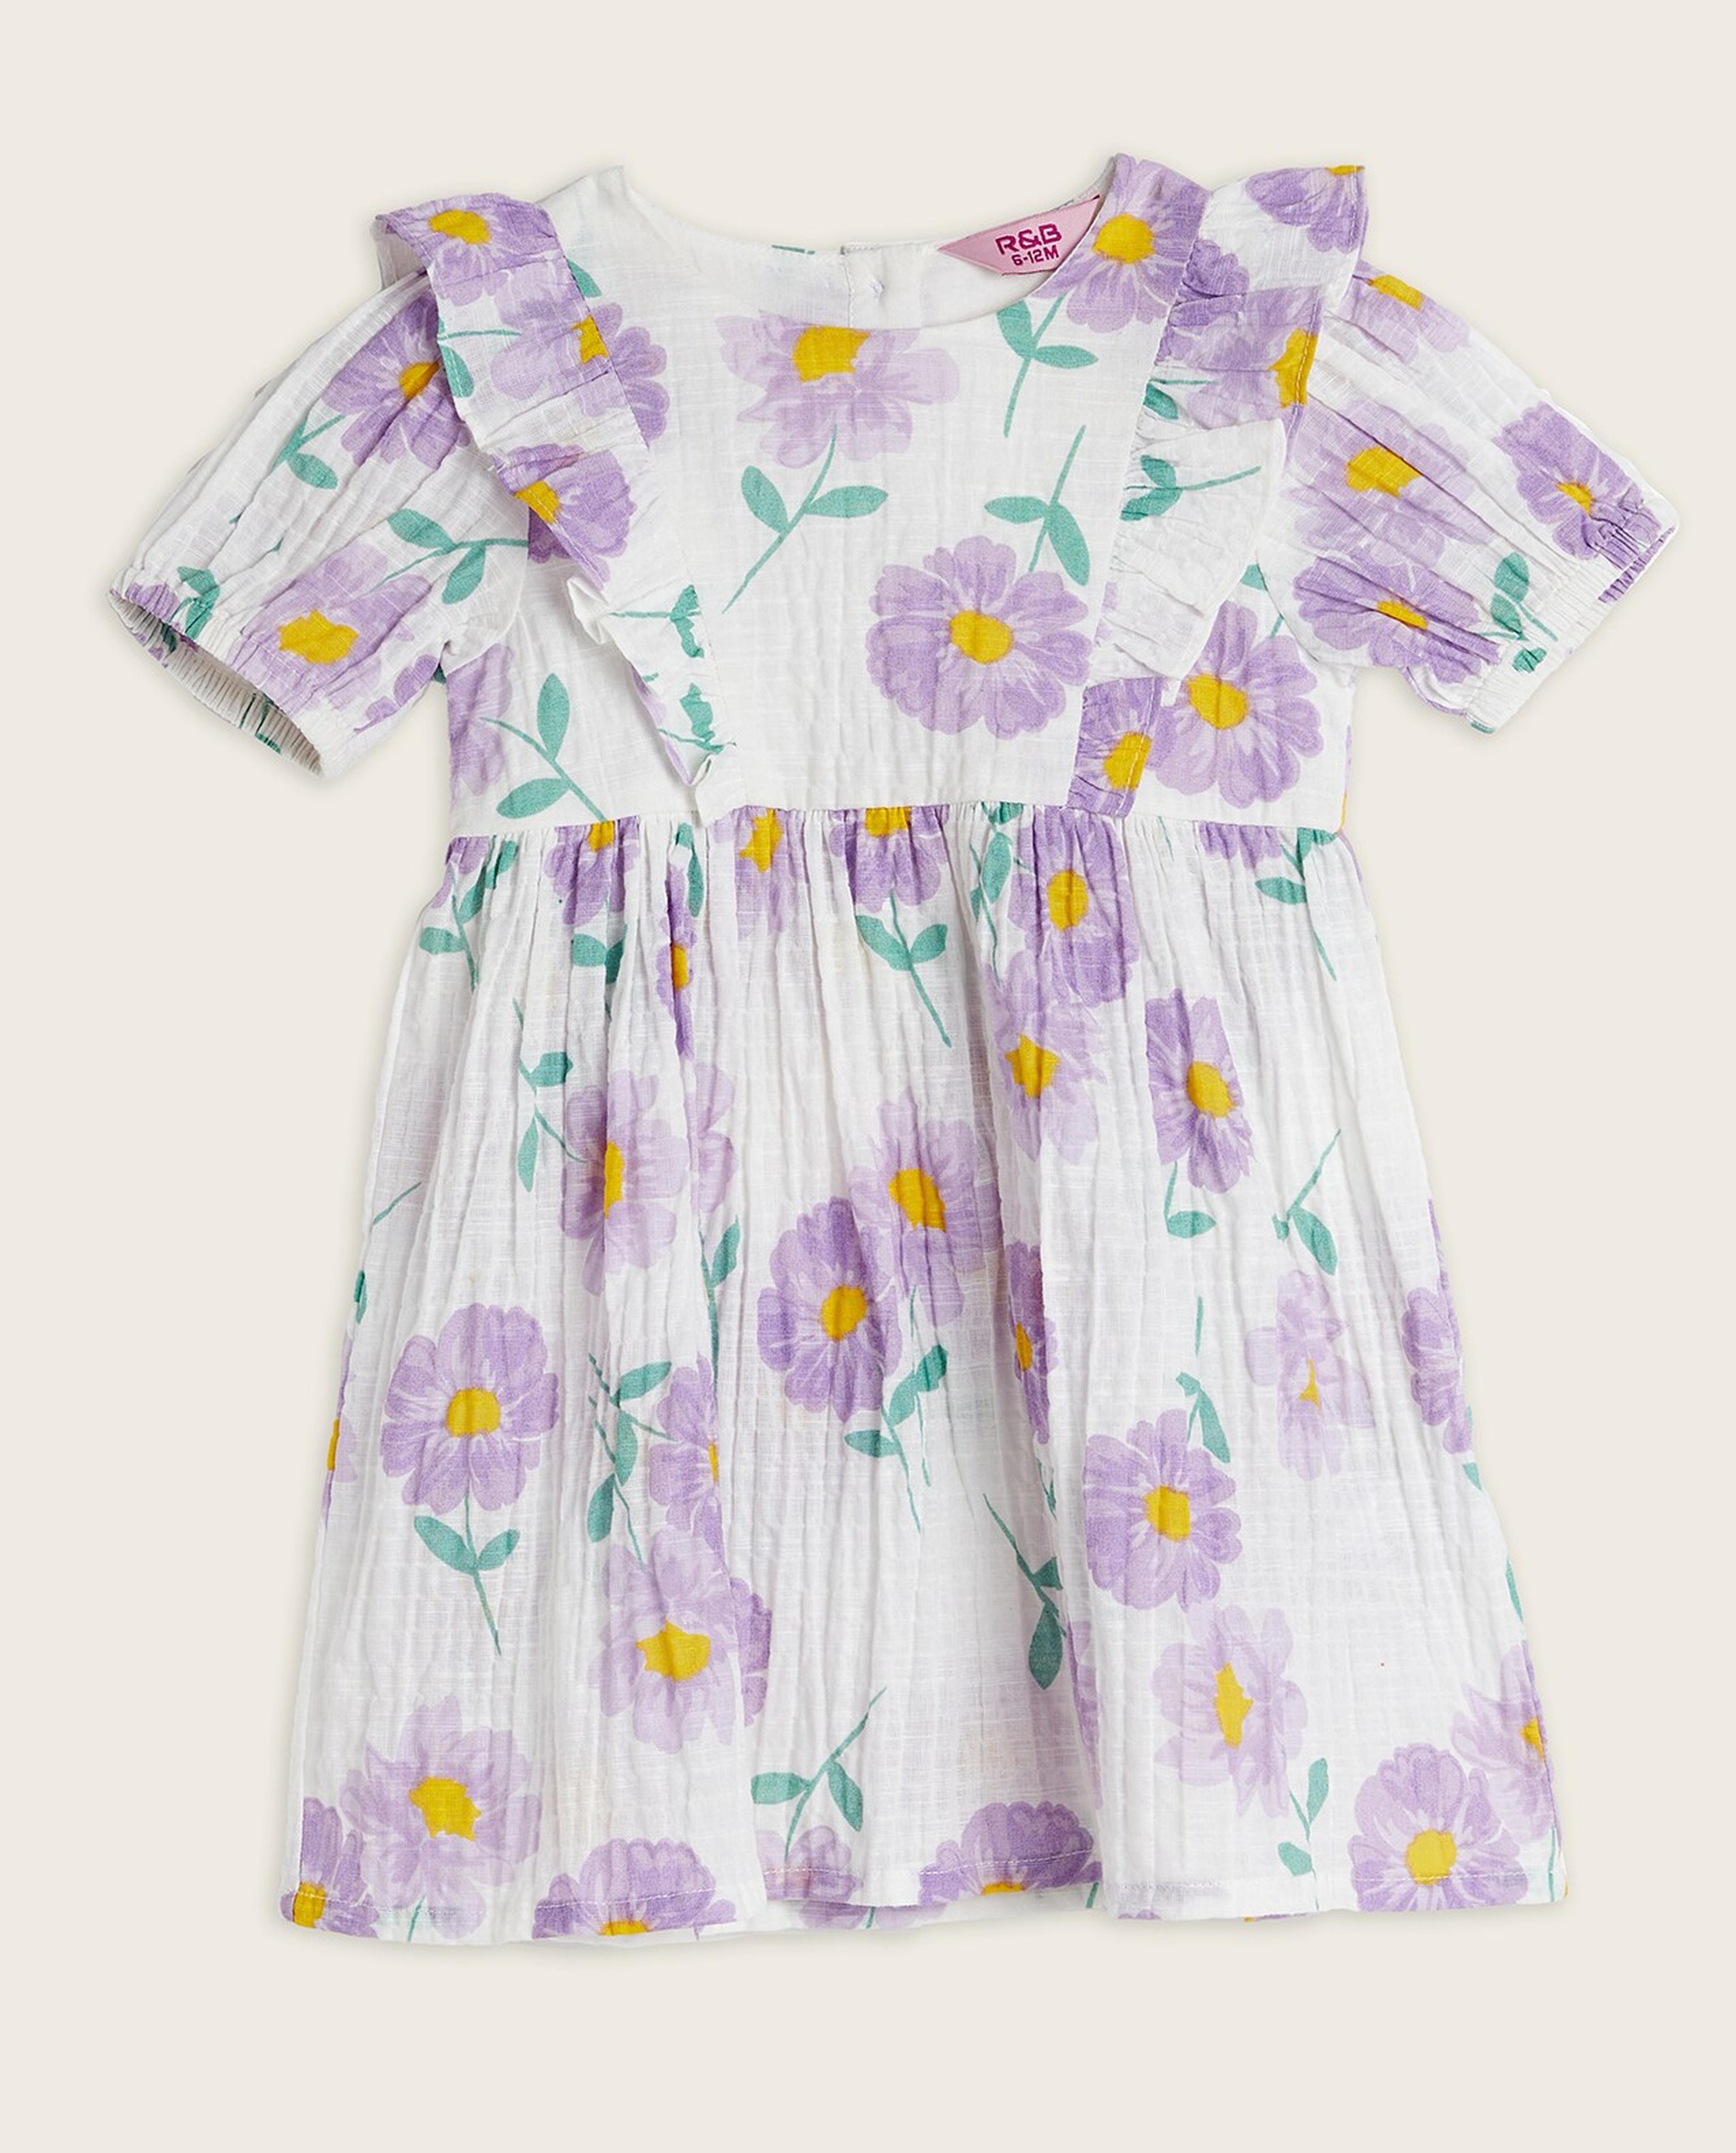 Floral Printed Fit and Flared Dress with Bloomers